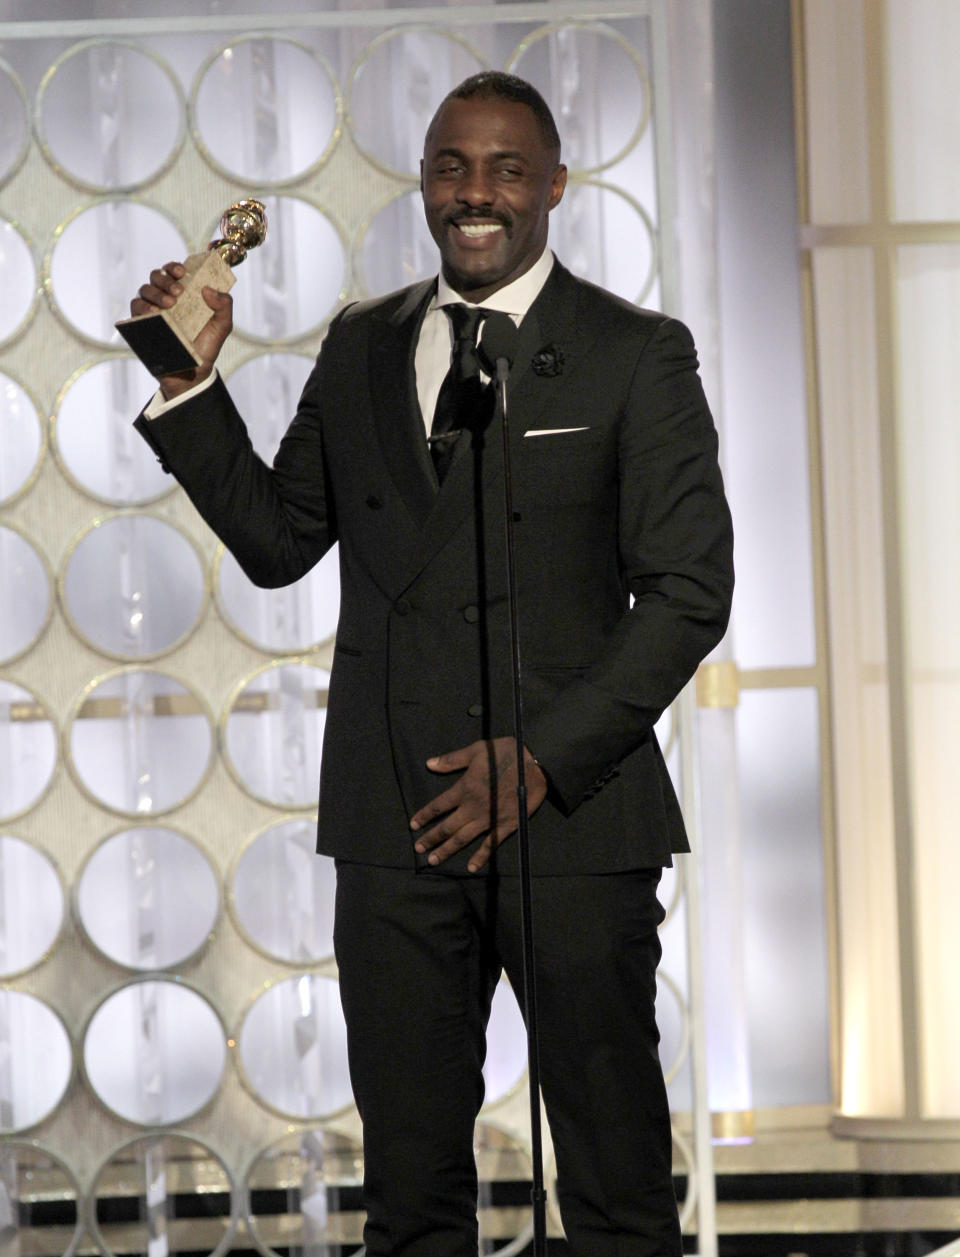 69th Annual Golden Globes Awards - Show